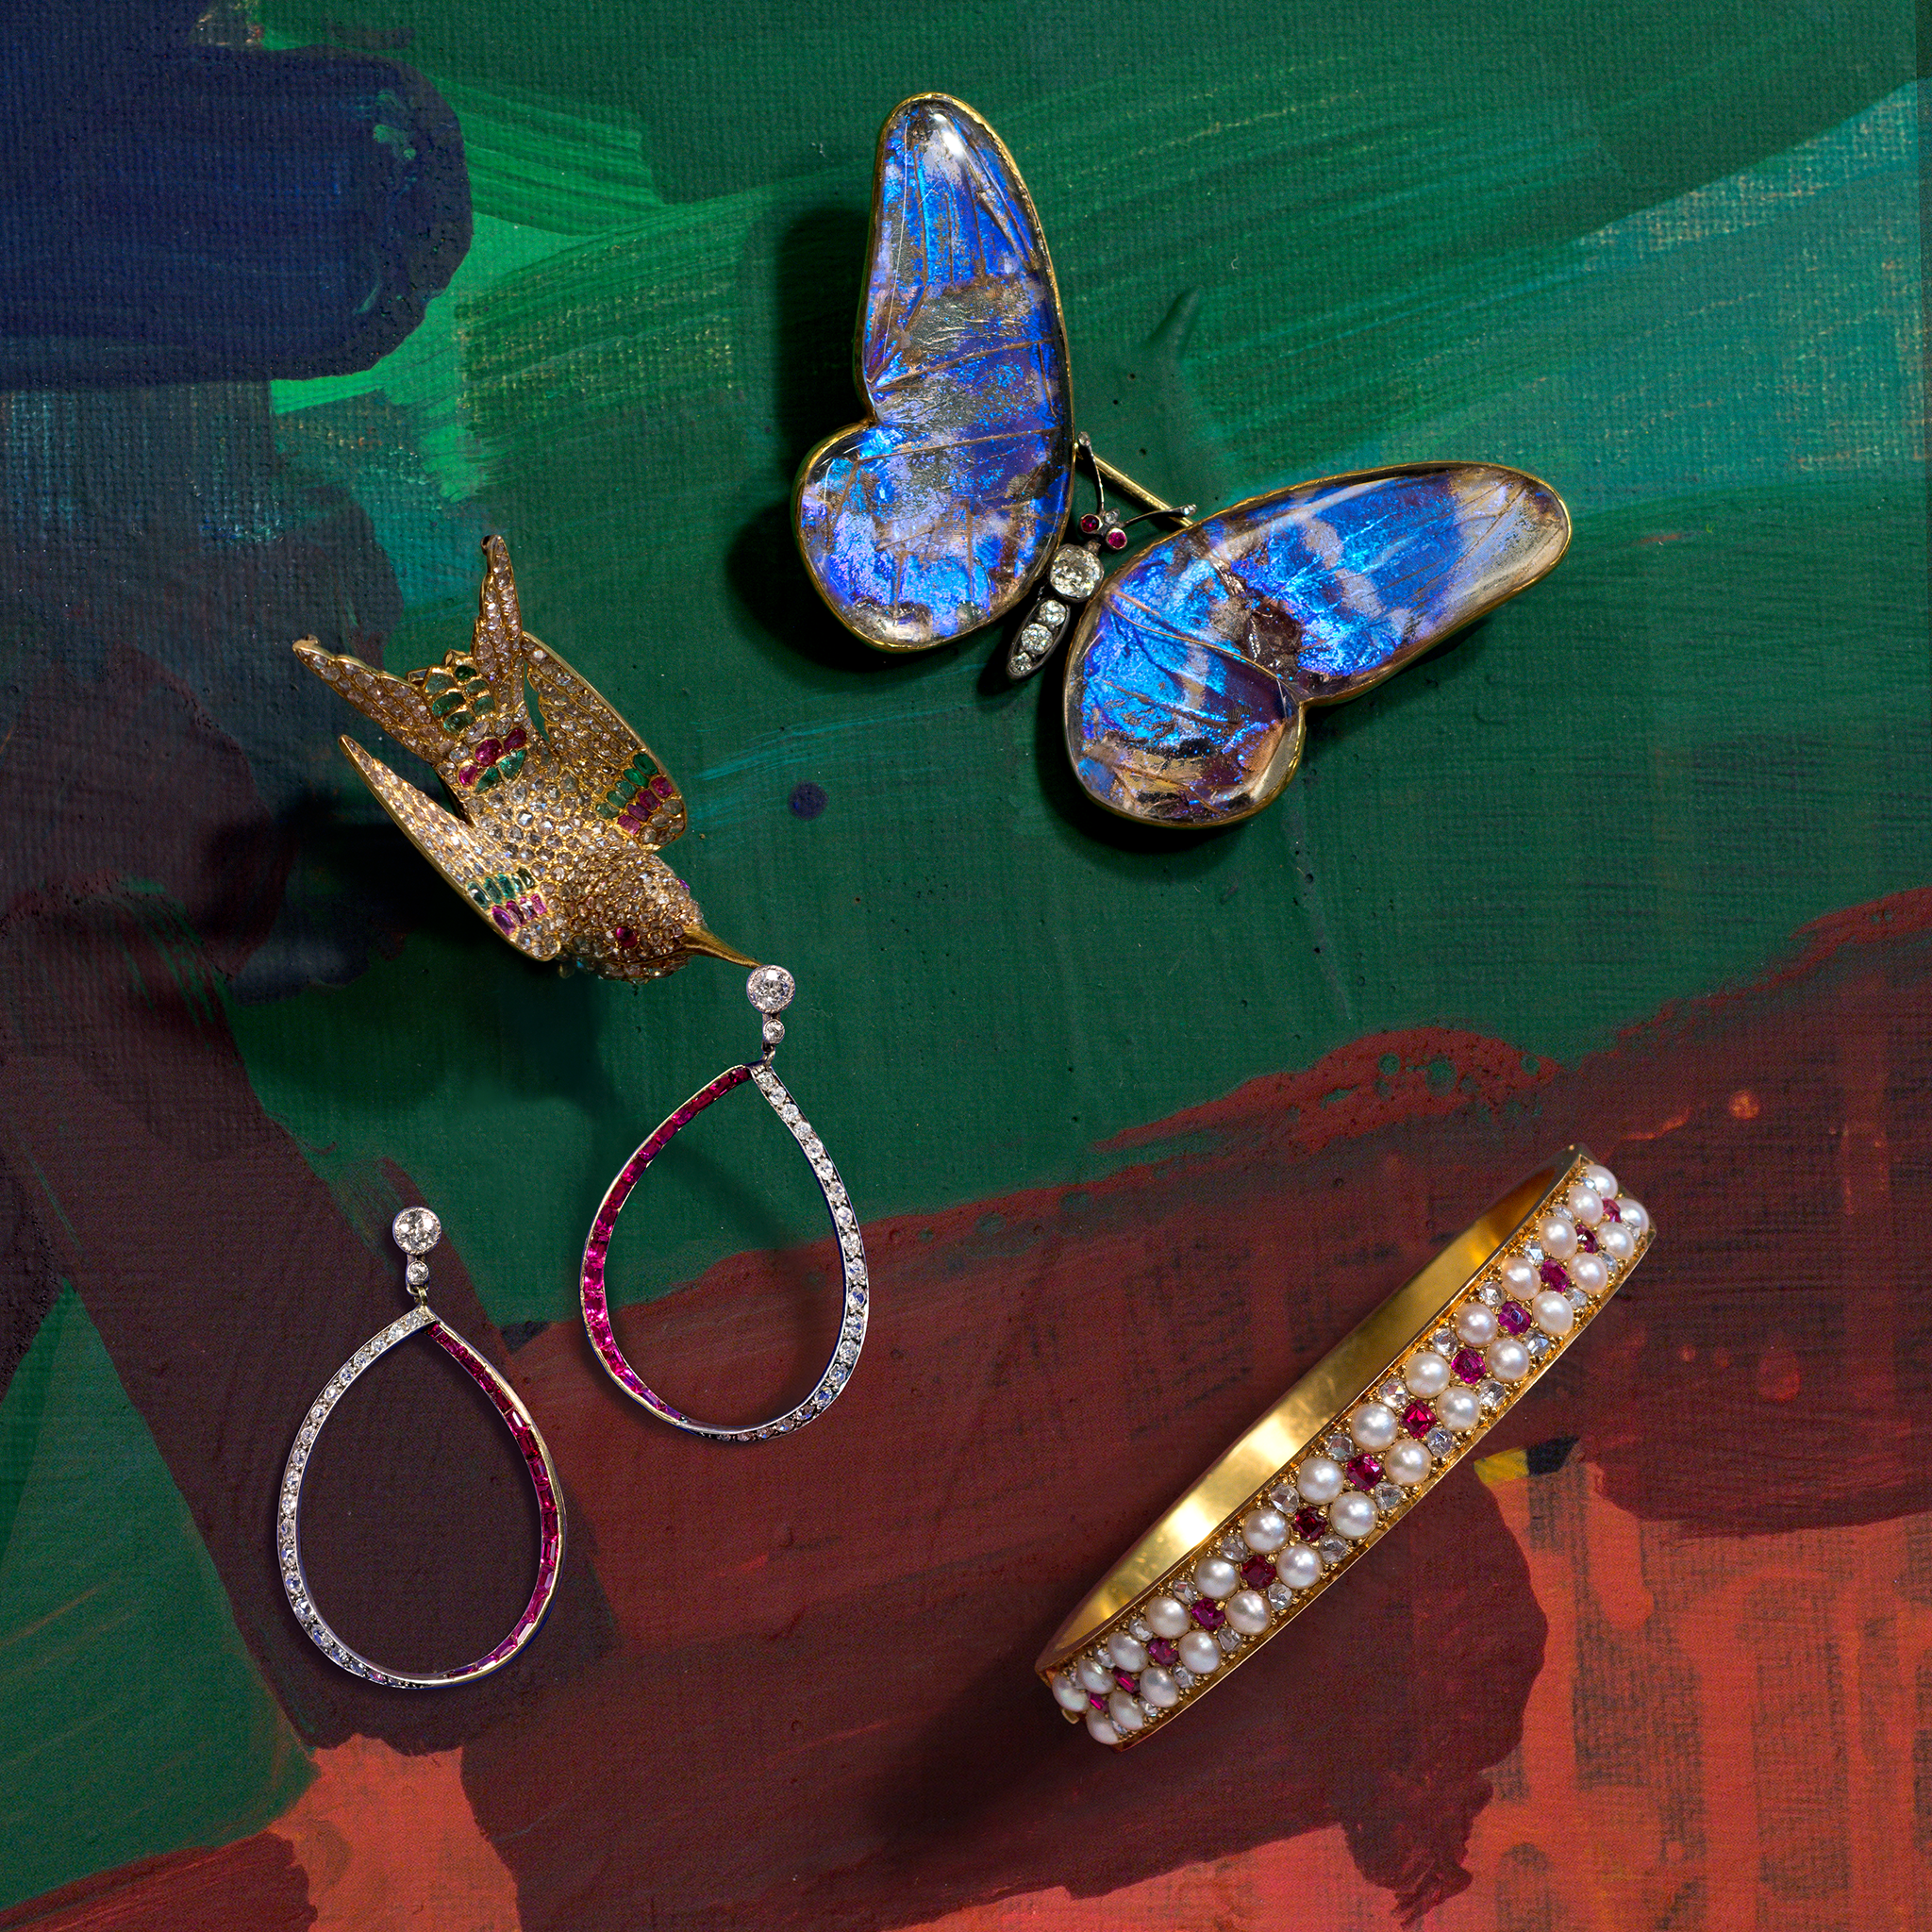 assortment of vintage jewelry from Kentshire